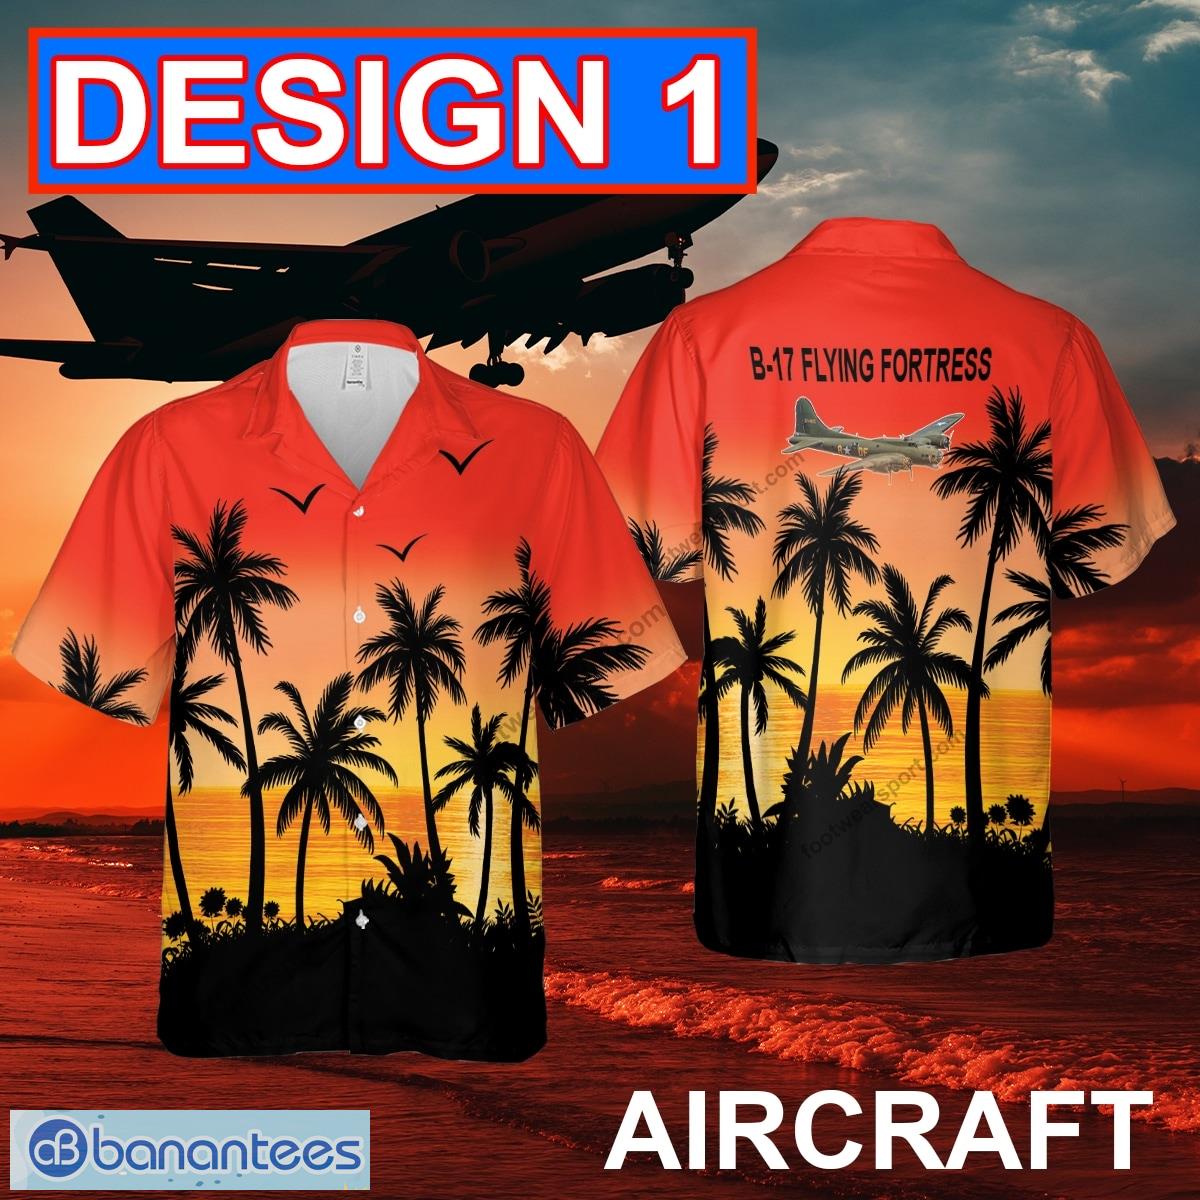 B-17 Flying Fortress B17 Aircraft Hawaiian Shirt Red Color All Over Print Special Gifts - B-17 Flying Fortress B17 Aircraft Hawaiian Shirt Multi Design 1